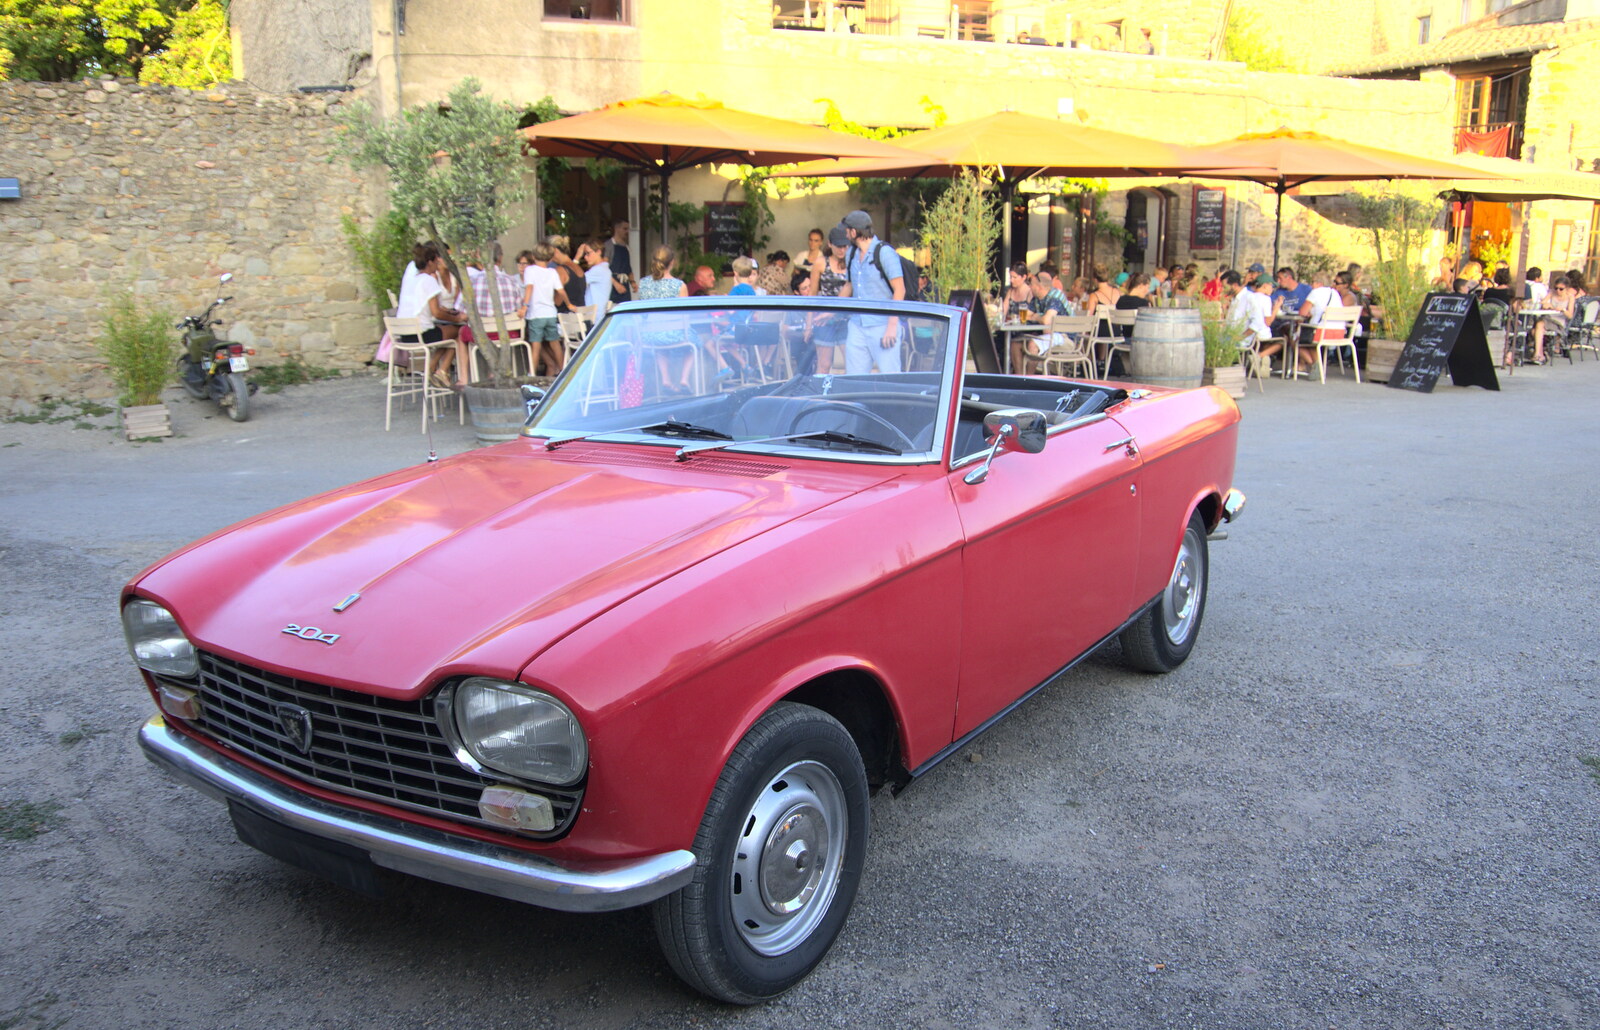 There's a Peugeot 204 convertible in the square from Abbaye Sainte-Marie de Lagrasse and The Lac de la Cavayère, Aude, France - 10th August